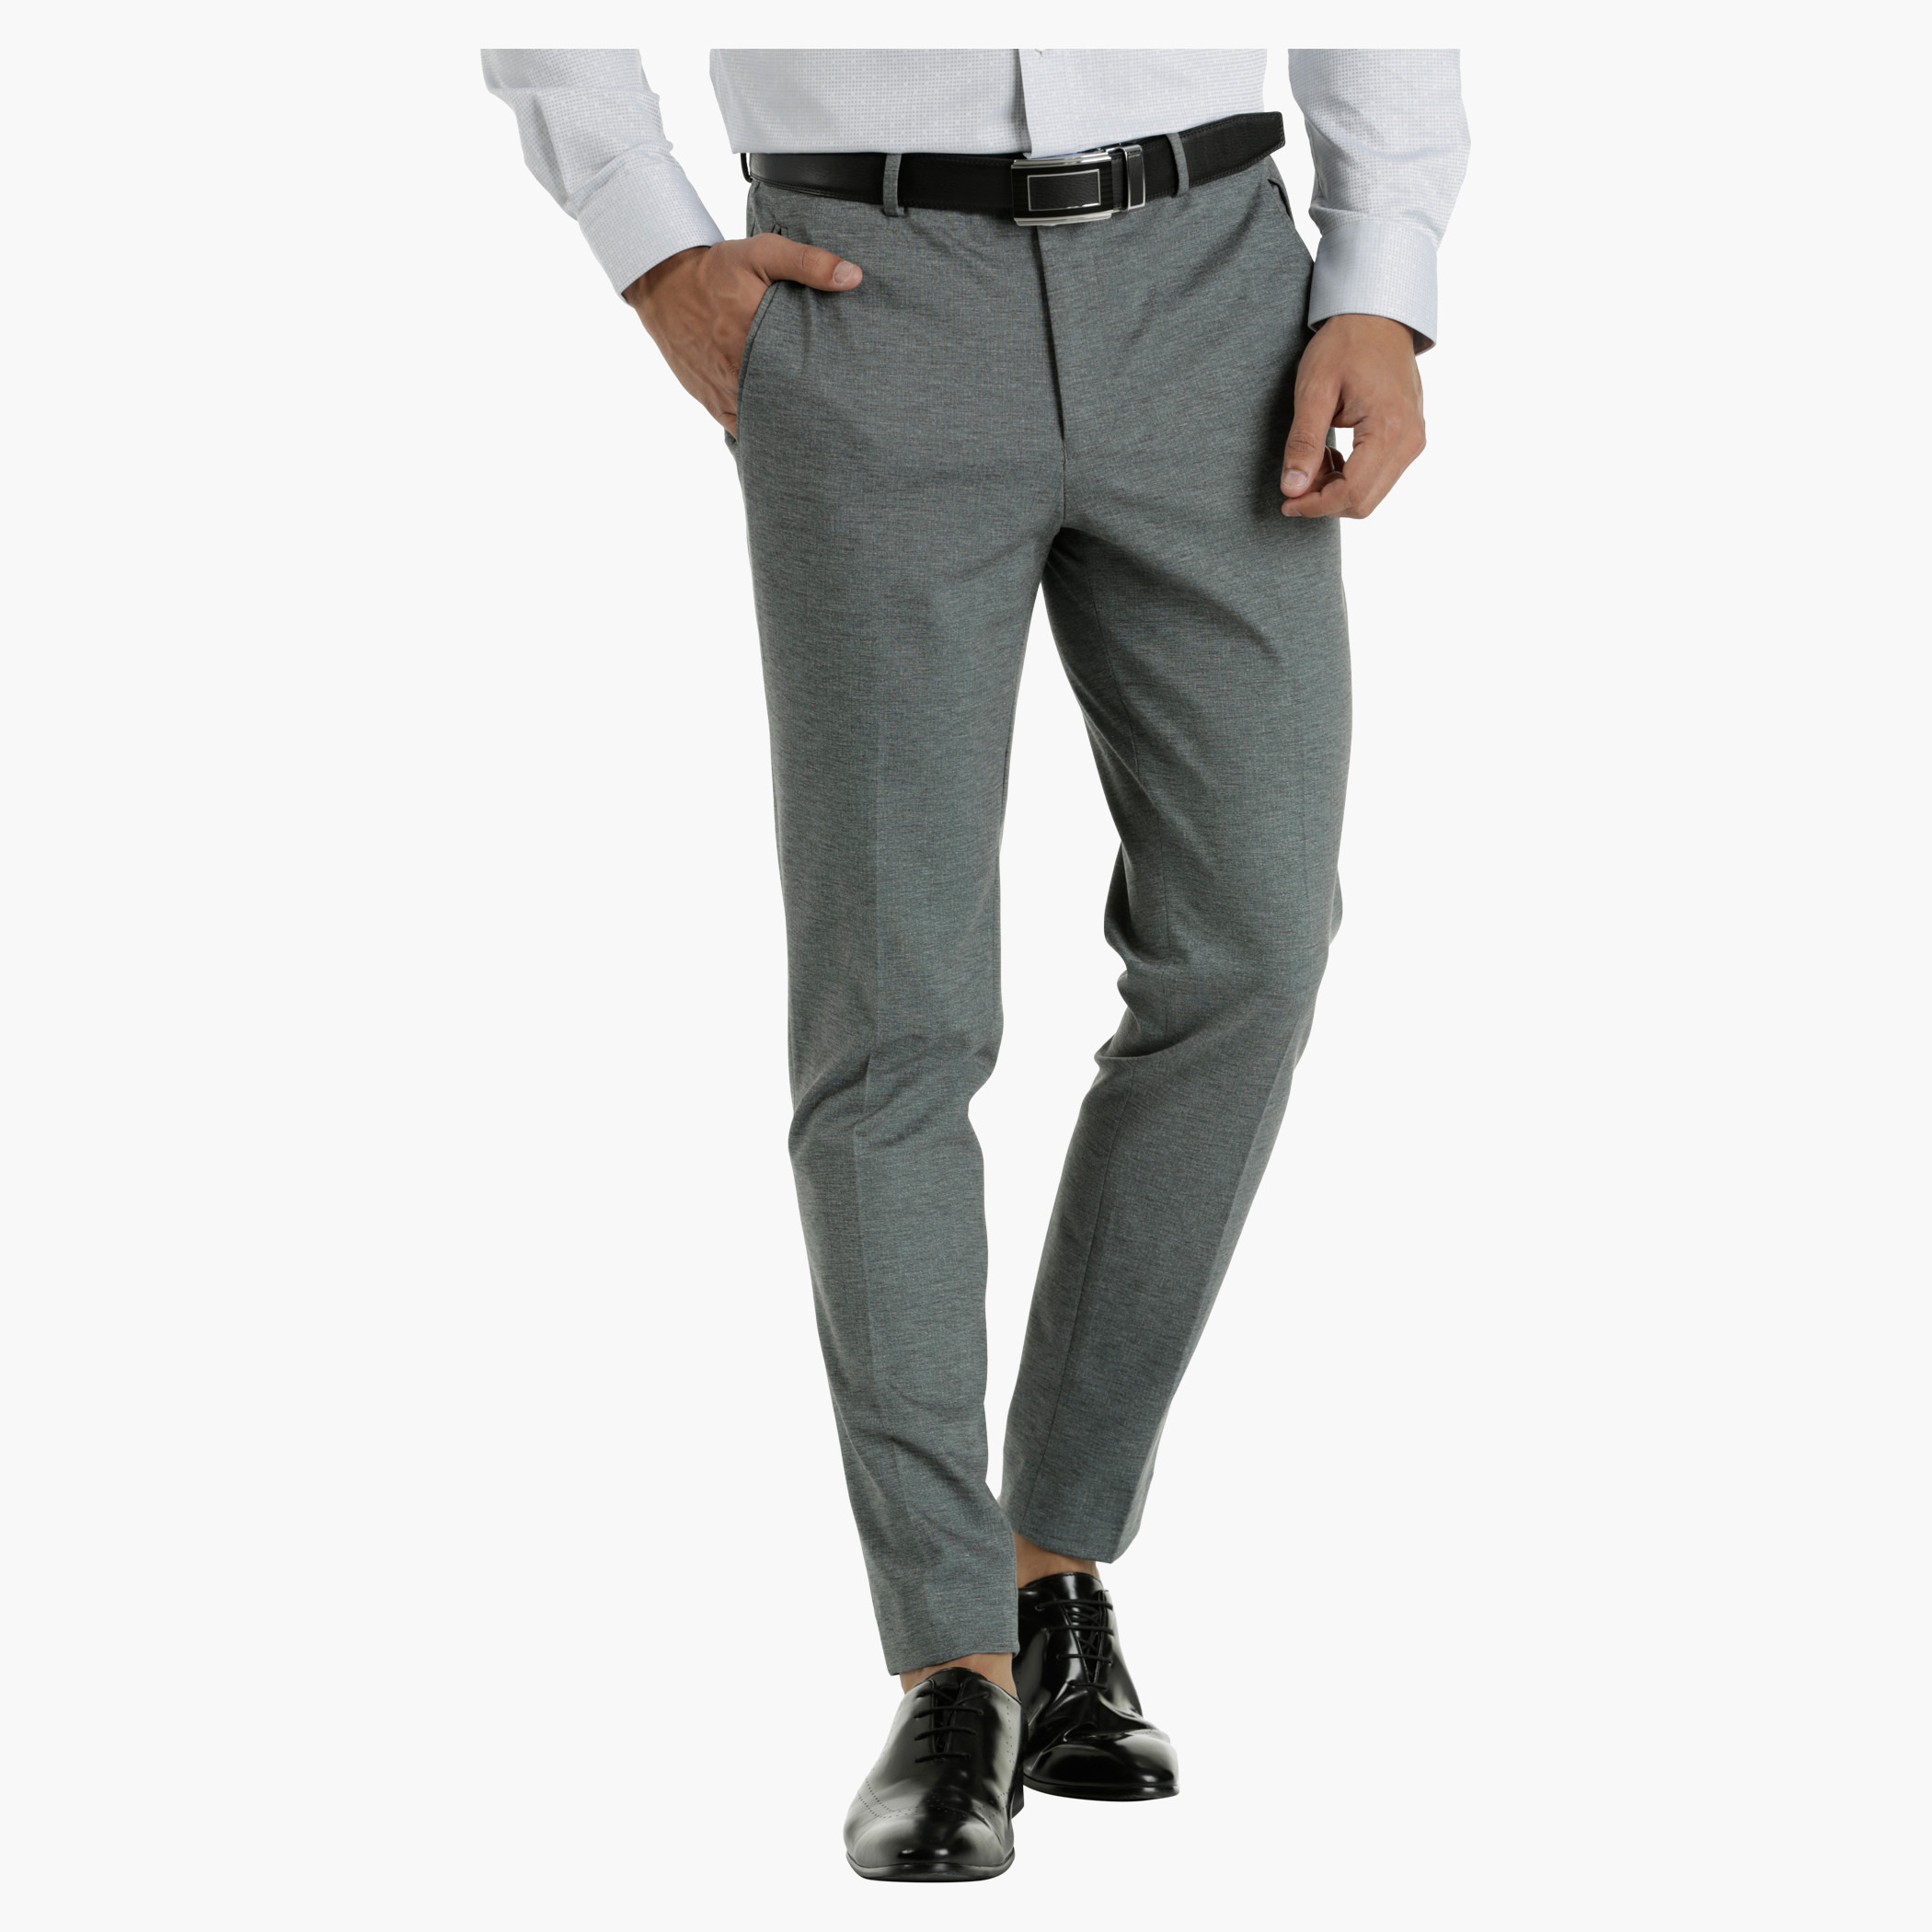 Black Jeans Men's Elasticity Slim Fit Skinny Pants Men Spring Trousers at  Rs 2142.43 | Narrow Fit Formal Trousers, मैन स्लिम फिट ट्राउजर, पुरुषों के  स्लिम फिट ट्राउजर - My Online Collection